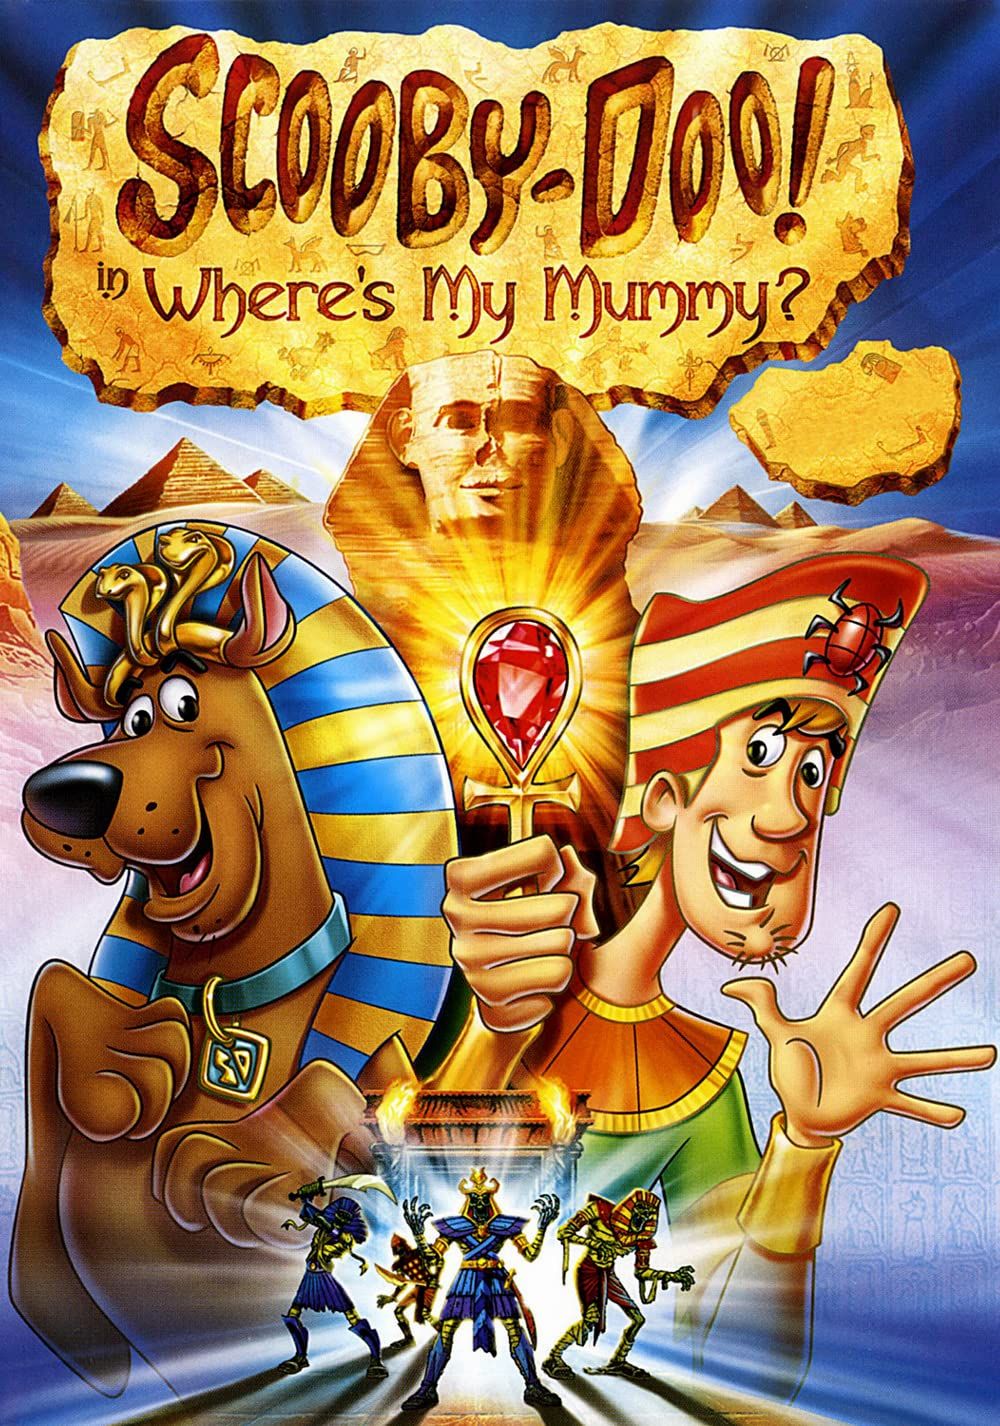 Scooby-Doo in Wheres My Mummy (2005) Hindi Dubbed HDRip download full movie